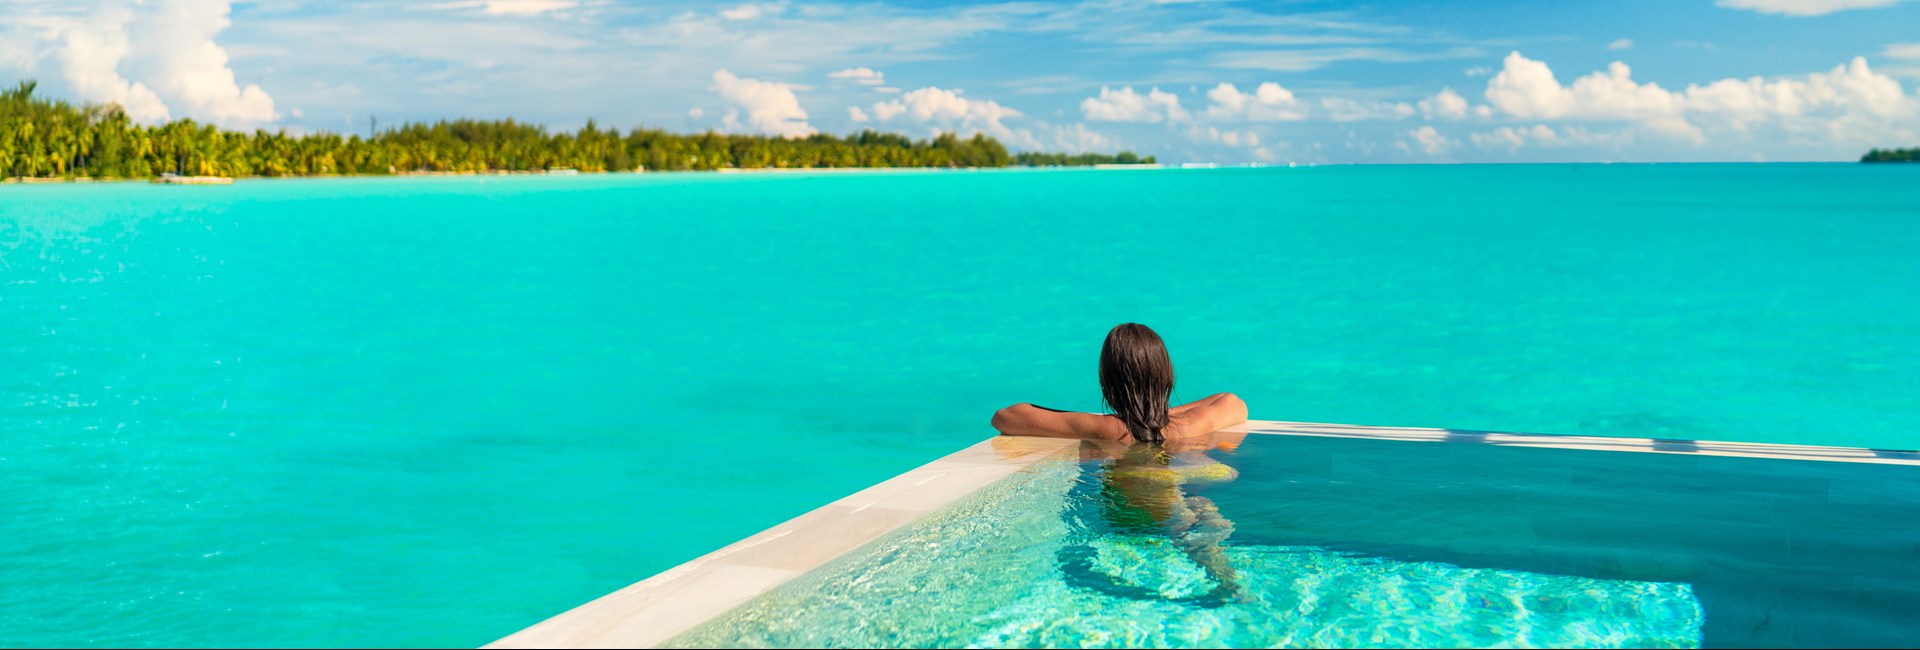 Woman relaxing in infinity pool on luxury beach holiday 